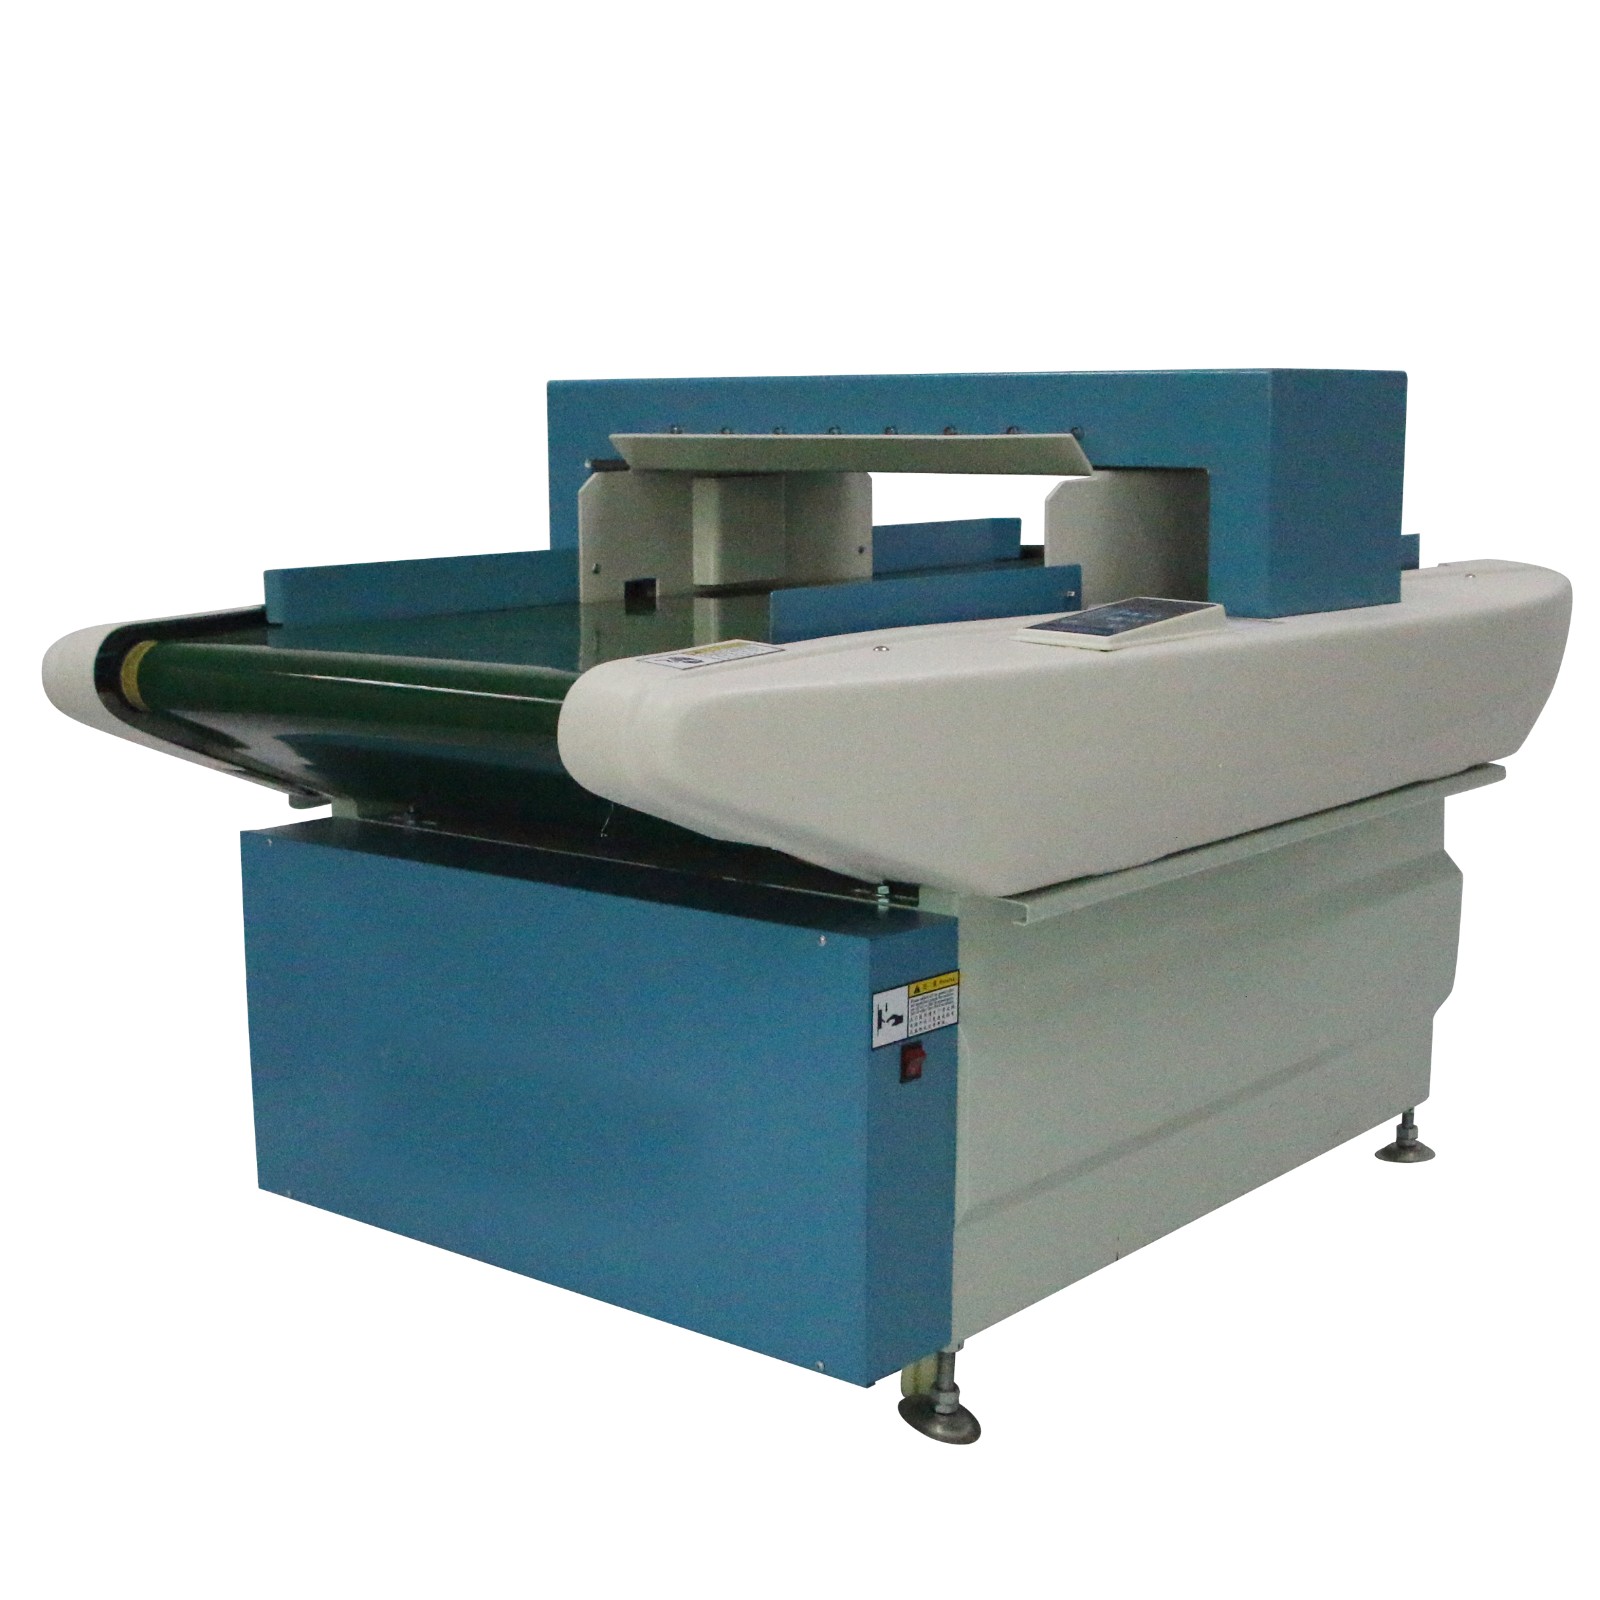 High accurate Needle Detection machine with conveyor